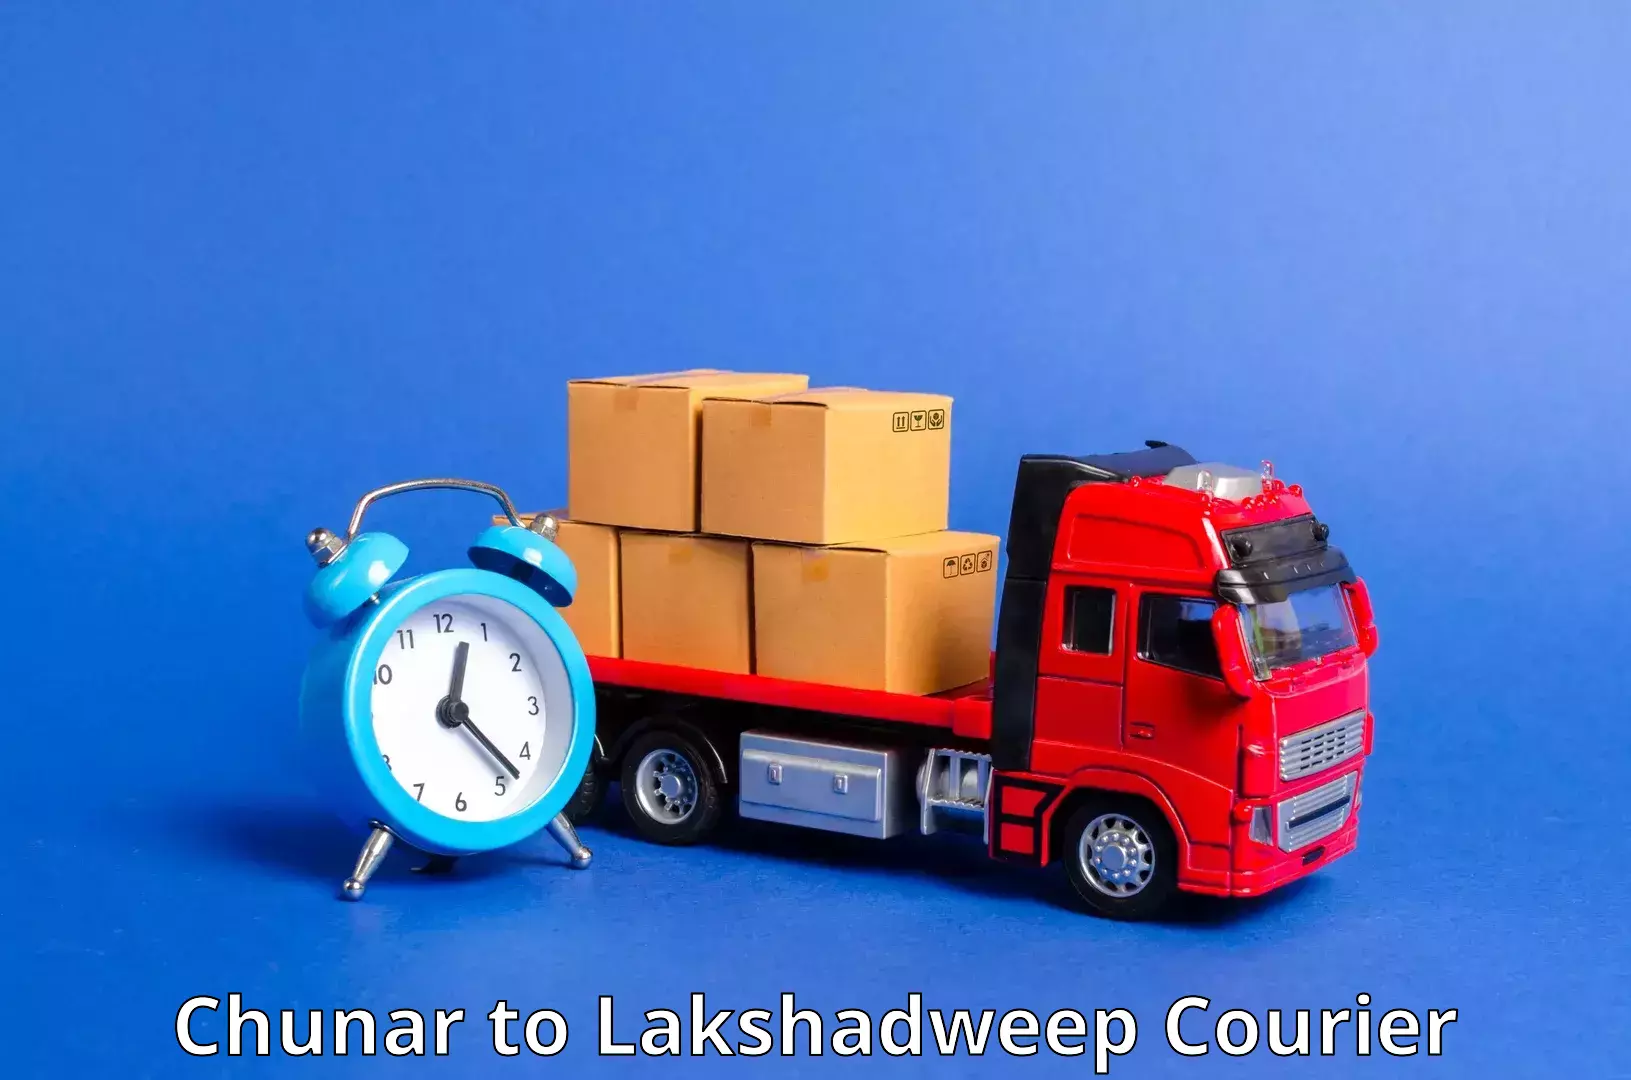 Courier service innovation Chunar to Lakshadweep